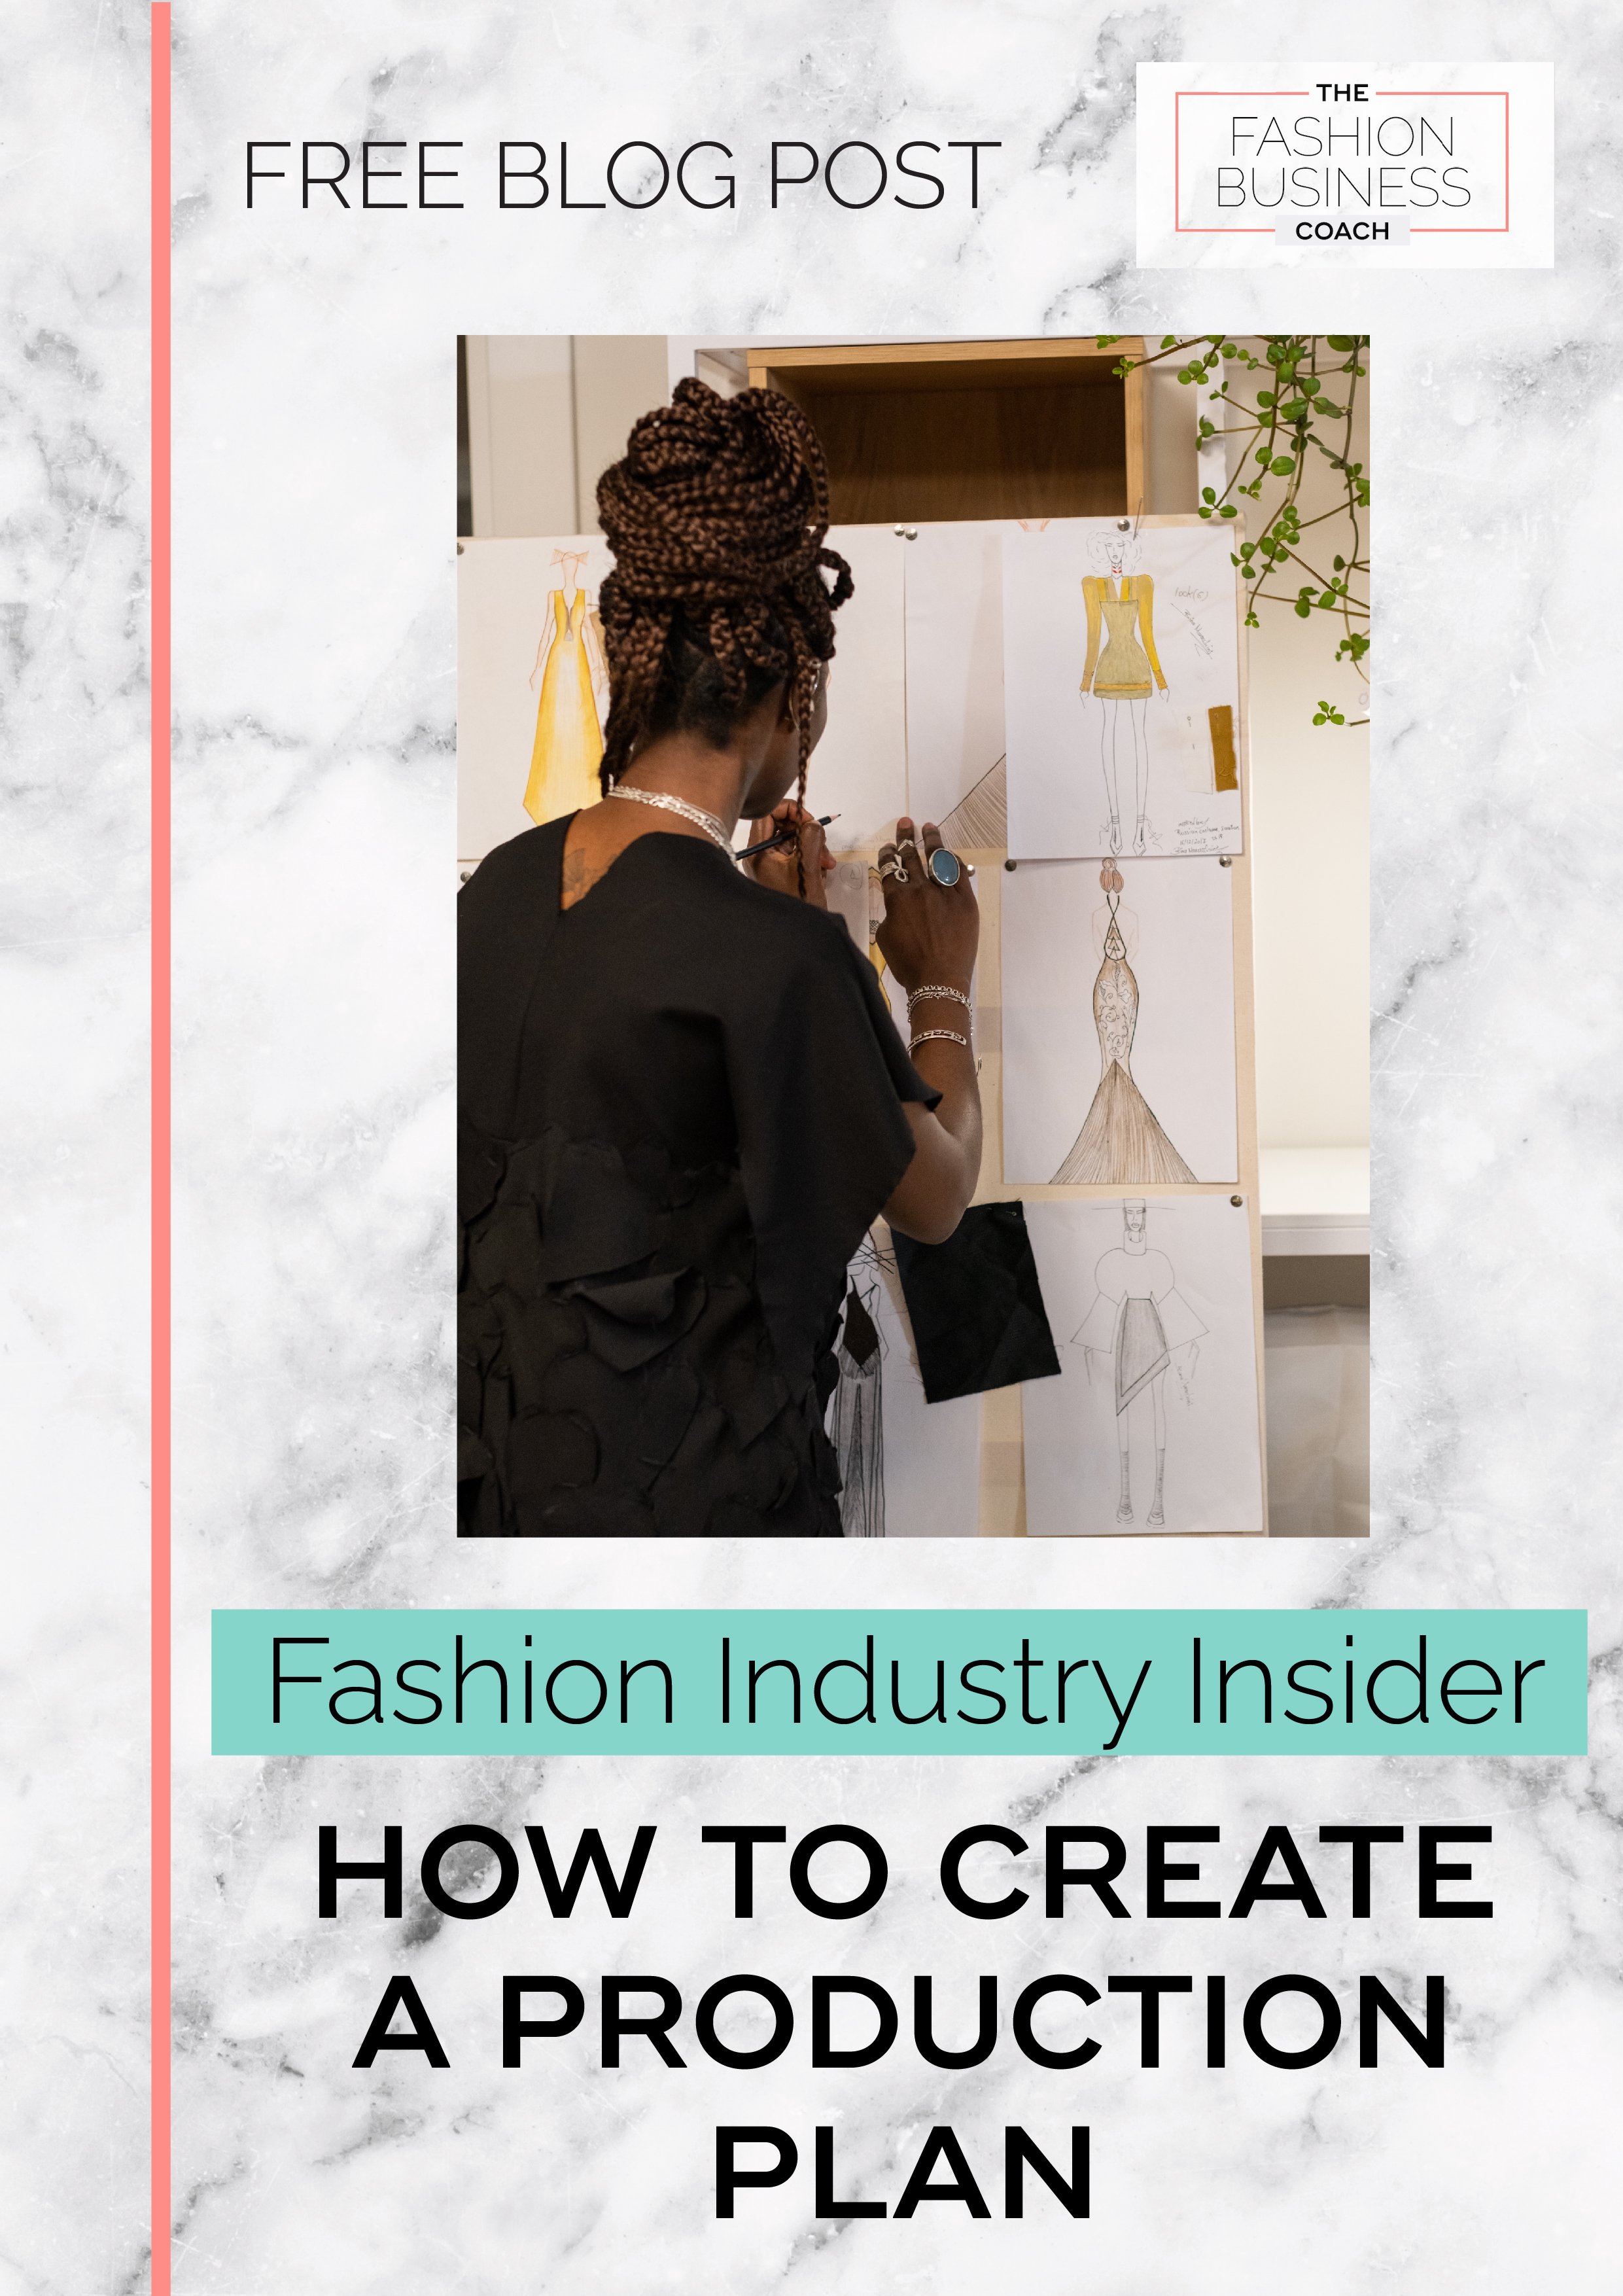 Pinterest_Fashion Industry Insider- How to Create a Production Plan 1.jpg